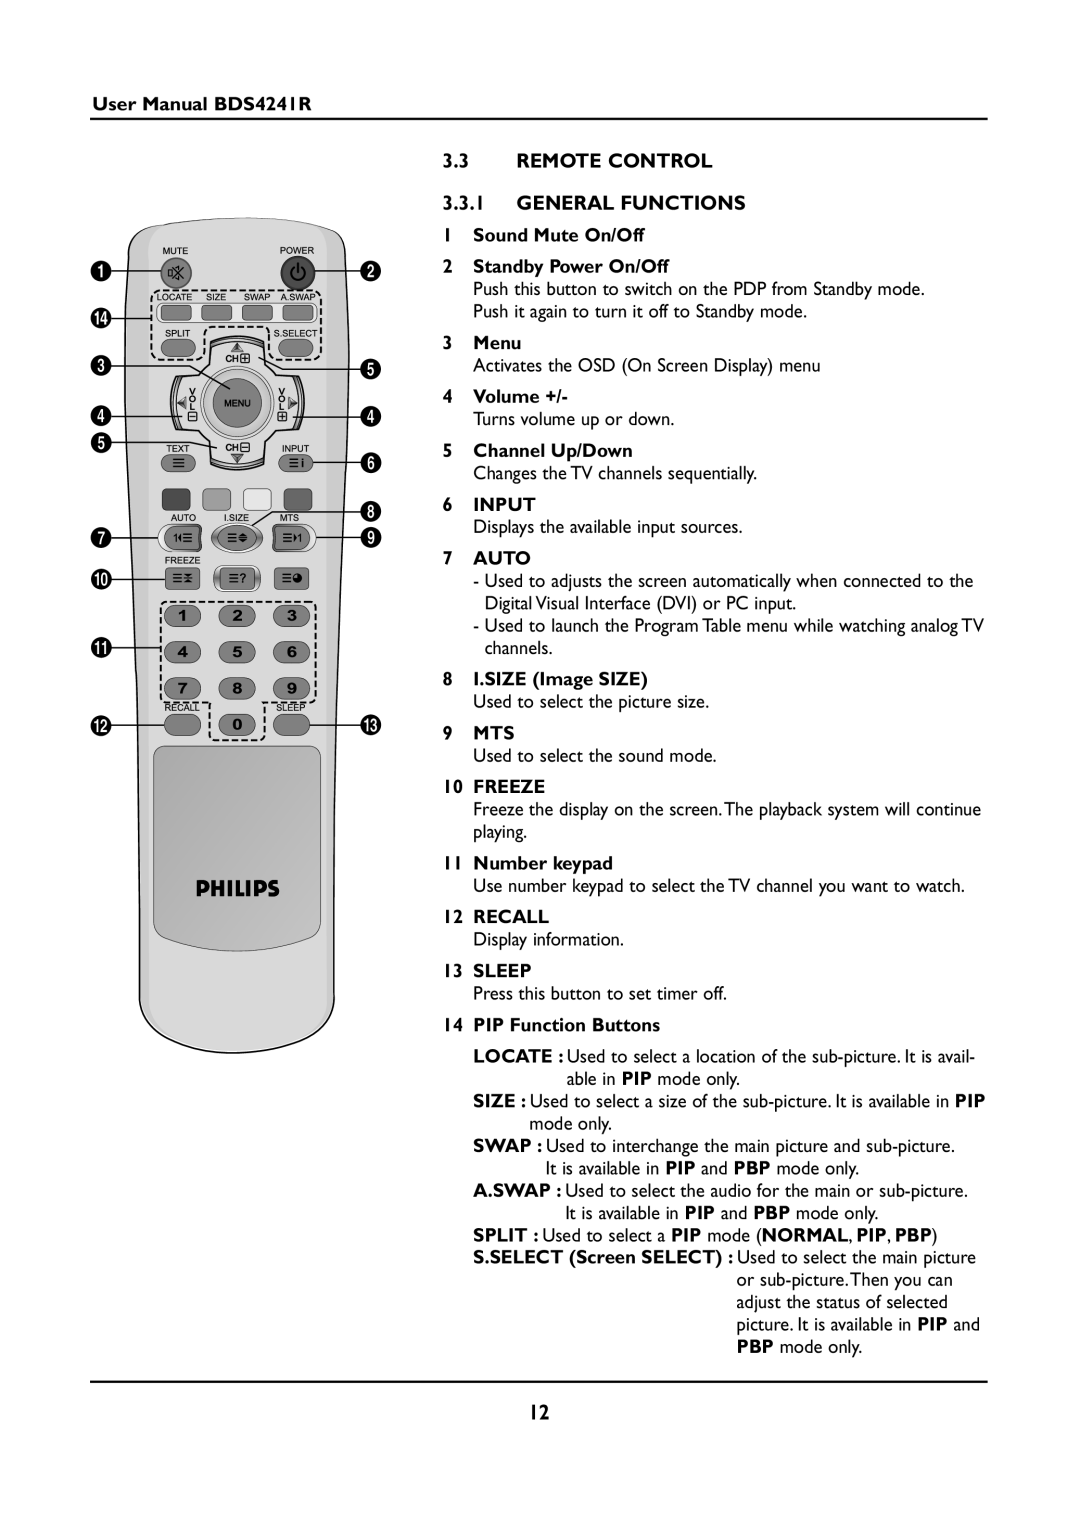 Philips BDS4241R/00 REMOTE CONTROL 3.3.1 GENERAL FUNCTIONS, Sound Mute On/Off 2 Standby Power On/Off, Menu, Volume +, Auto 